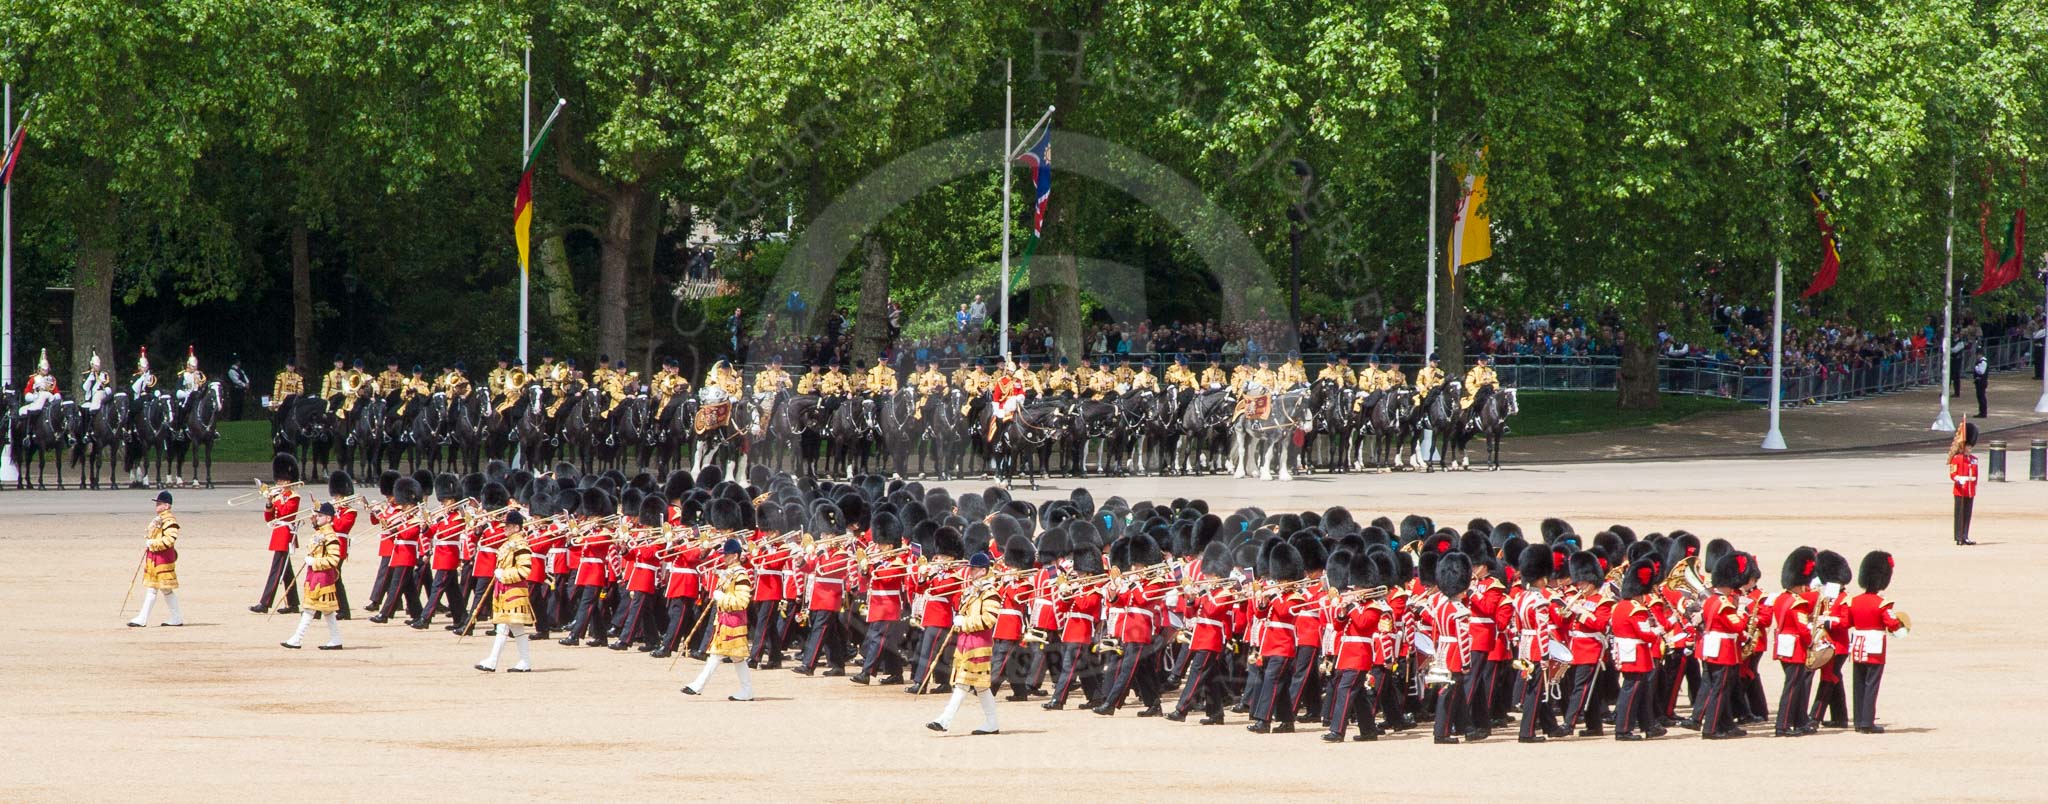 The Colonel's Review 2013: The Massed Bands, led by the five Drum Majors, during the March Past..
Horse Guards Parade, Westminster,
London SW1,

United Kingdom,
on 08 June 2013 at 11:32, image #617